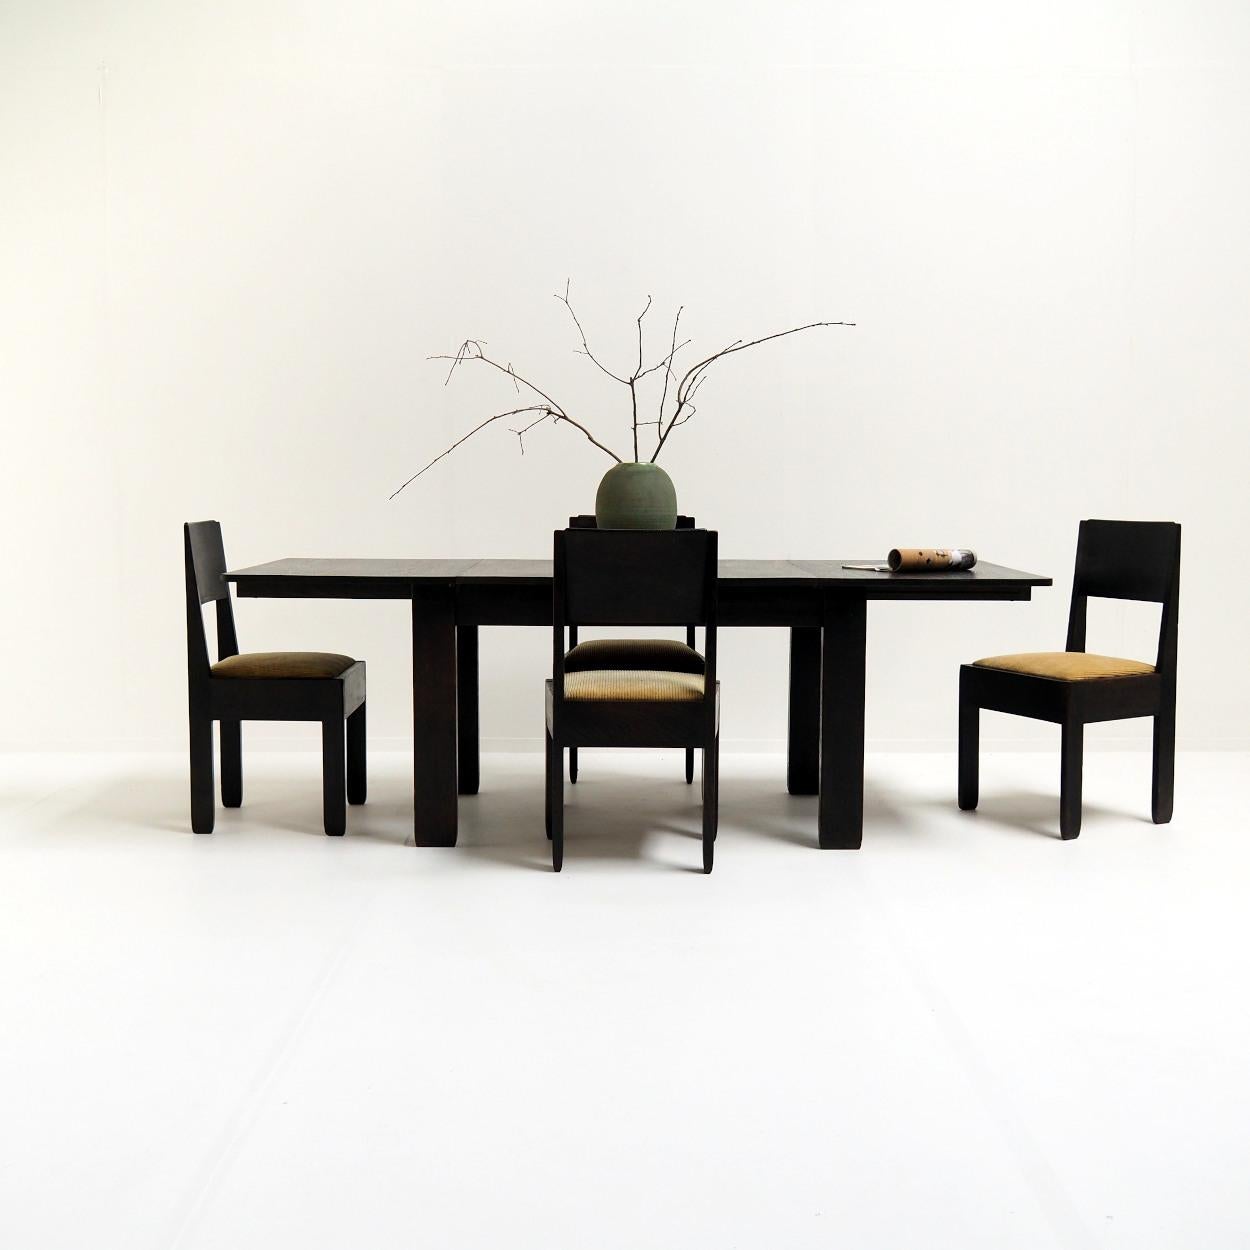 Beautiful Dutch dining set manufactured by L.O.V. (Labor Omnia Vincit - Labor Overcomes Everything) in the mid-1920s.

It was innovator Gerrit Pelt who founded L.O.V. in 1910 to create a better standard of living for the working class. He wanted